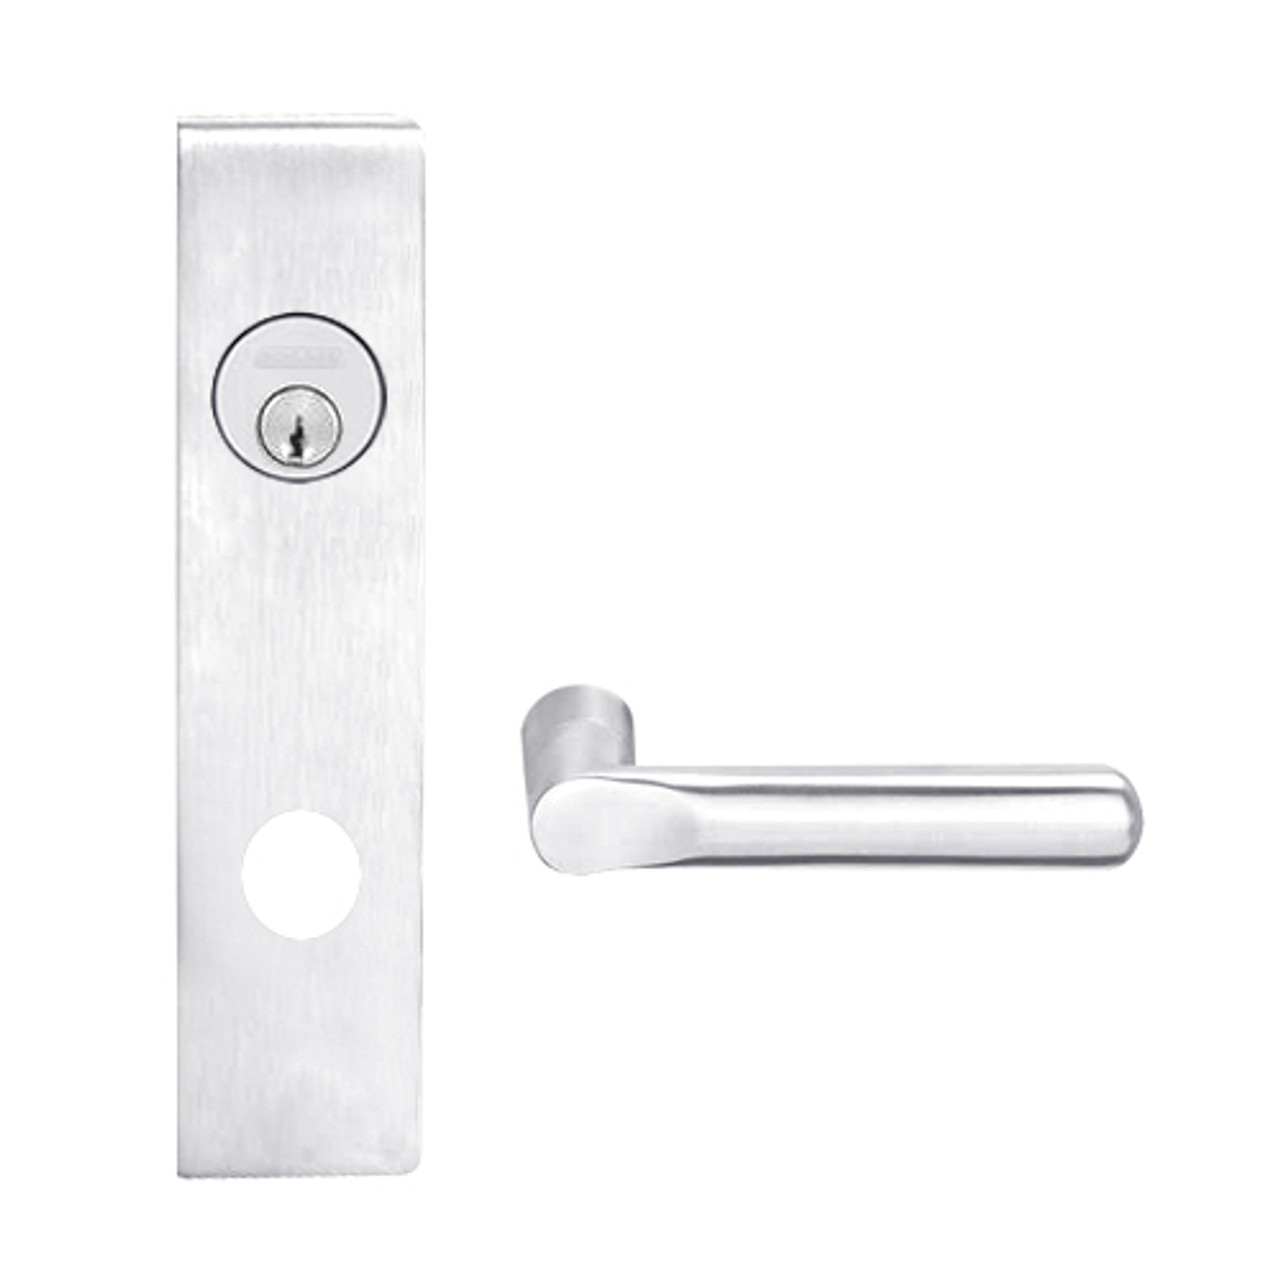 L9026L-18L-625 Schlage L Series Less Cylinder Exit Lock with Cylinder Commercial Mortise Lock with 18 Cast Lever Design in Bright Chrome